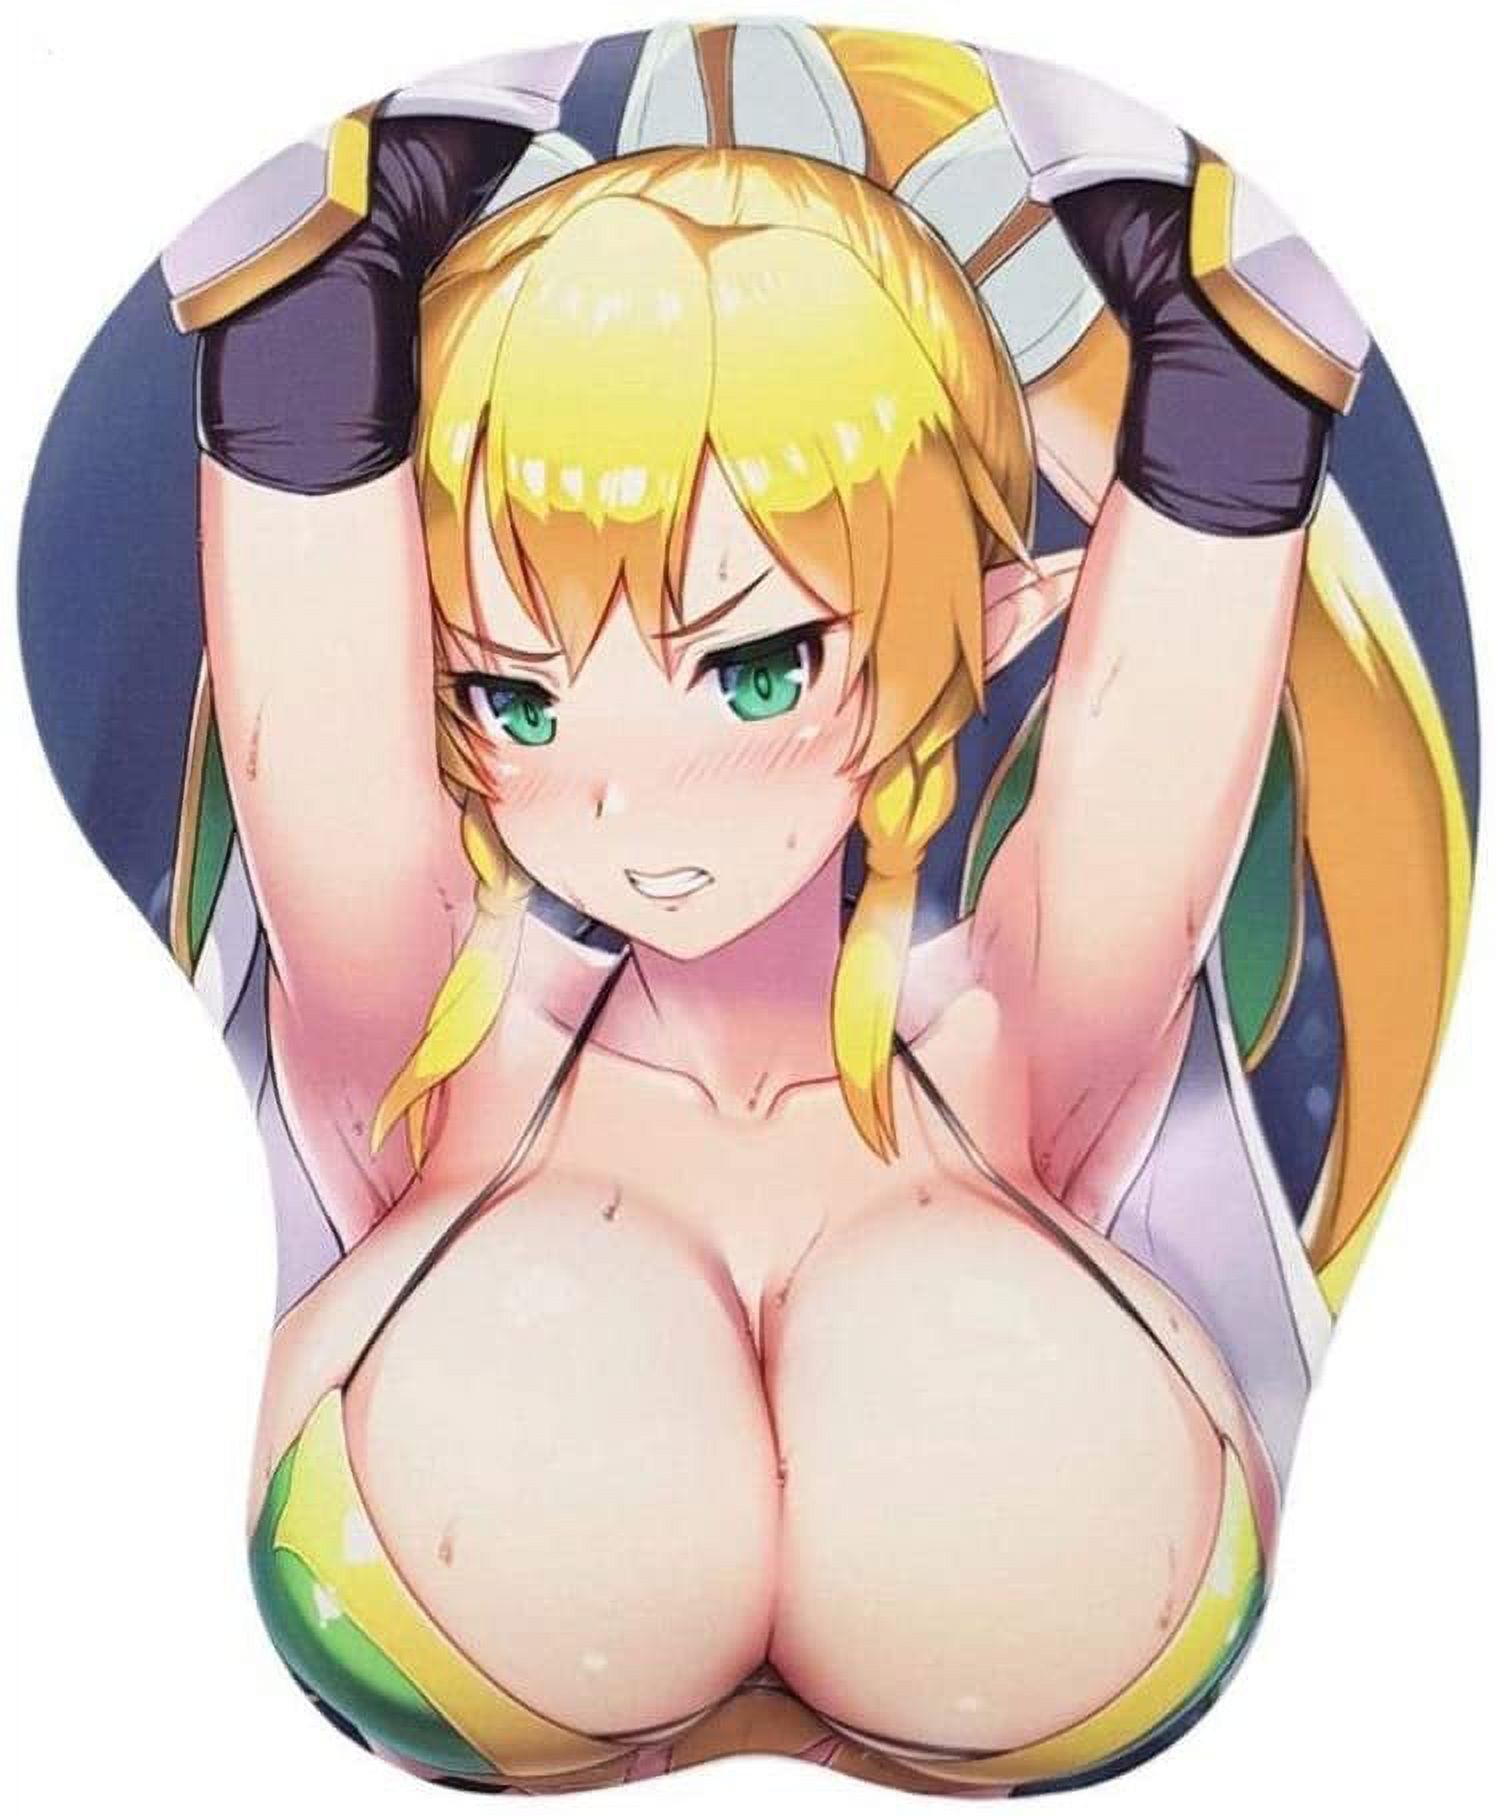 Swords Online Leaf Girl Anime Oppai Soft Ergonomic Mouse Pad w/ 3D Wrist Support - image 1 of 5